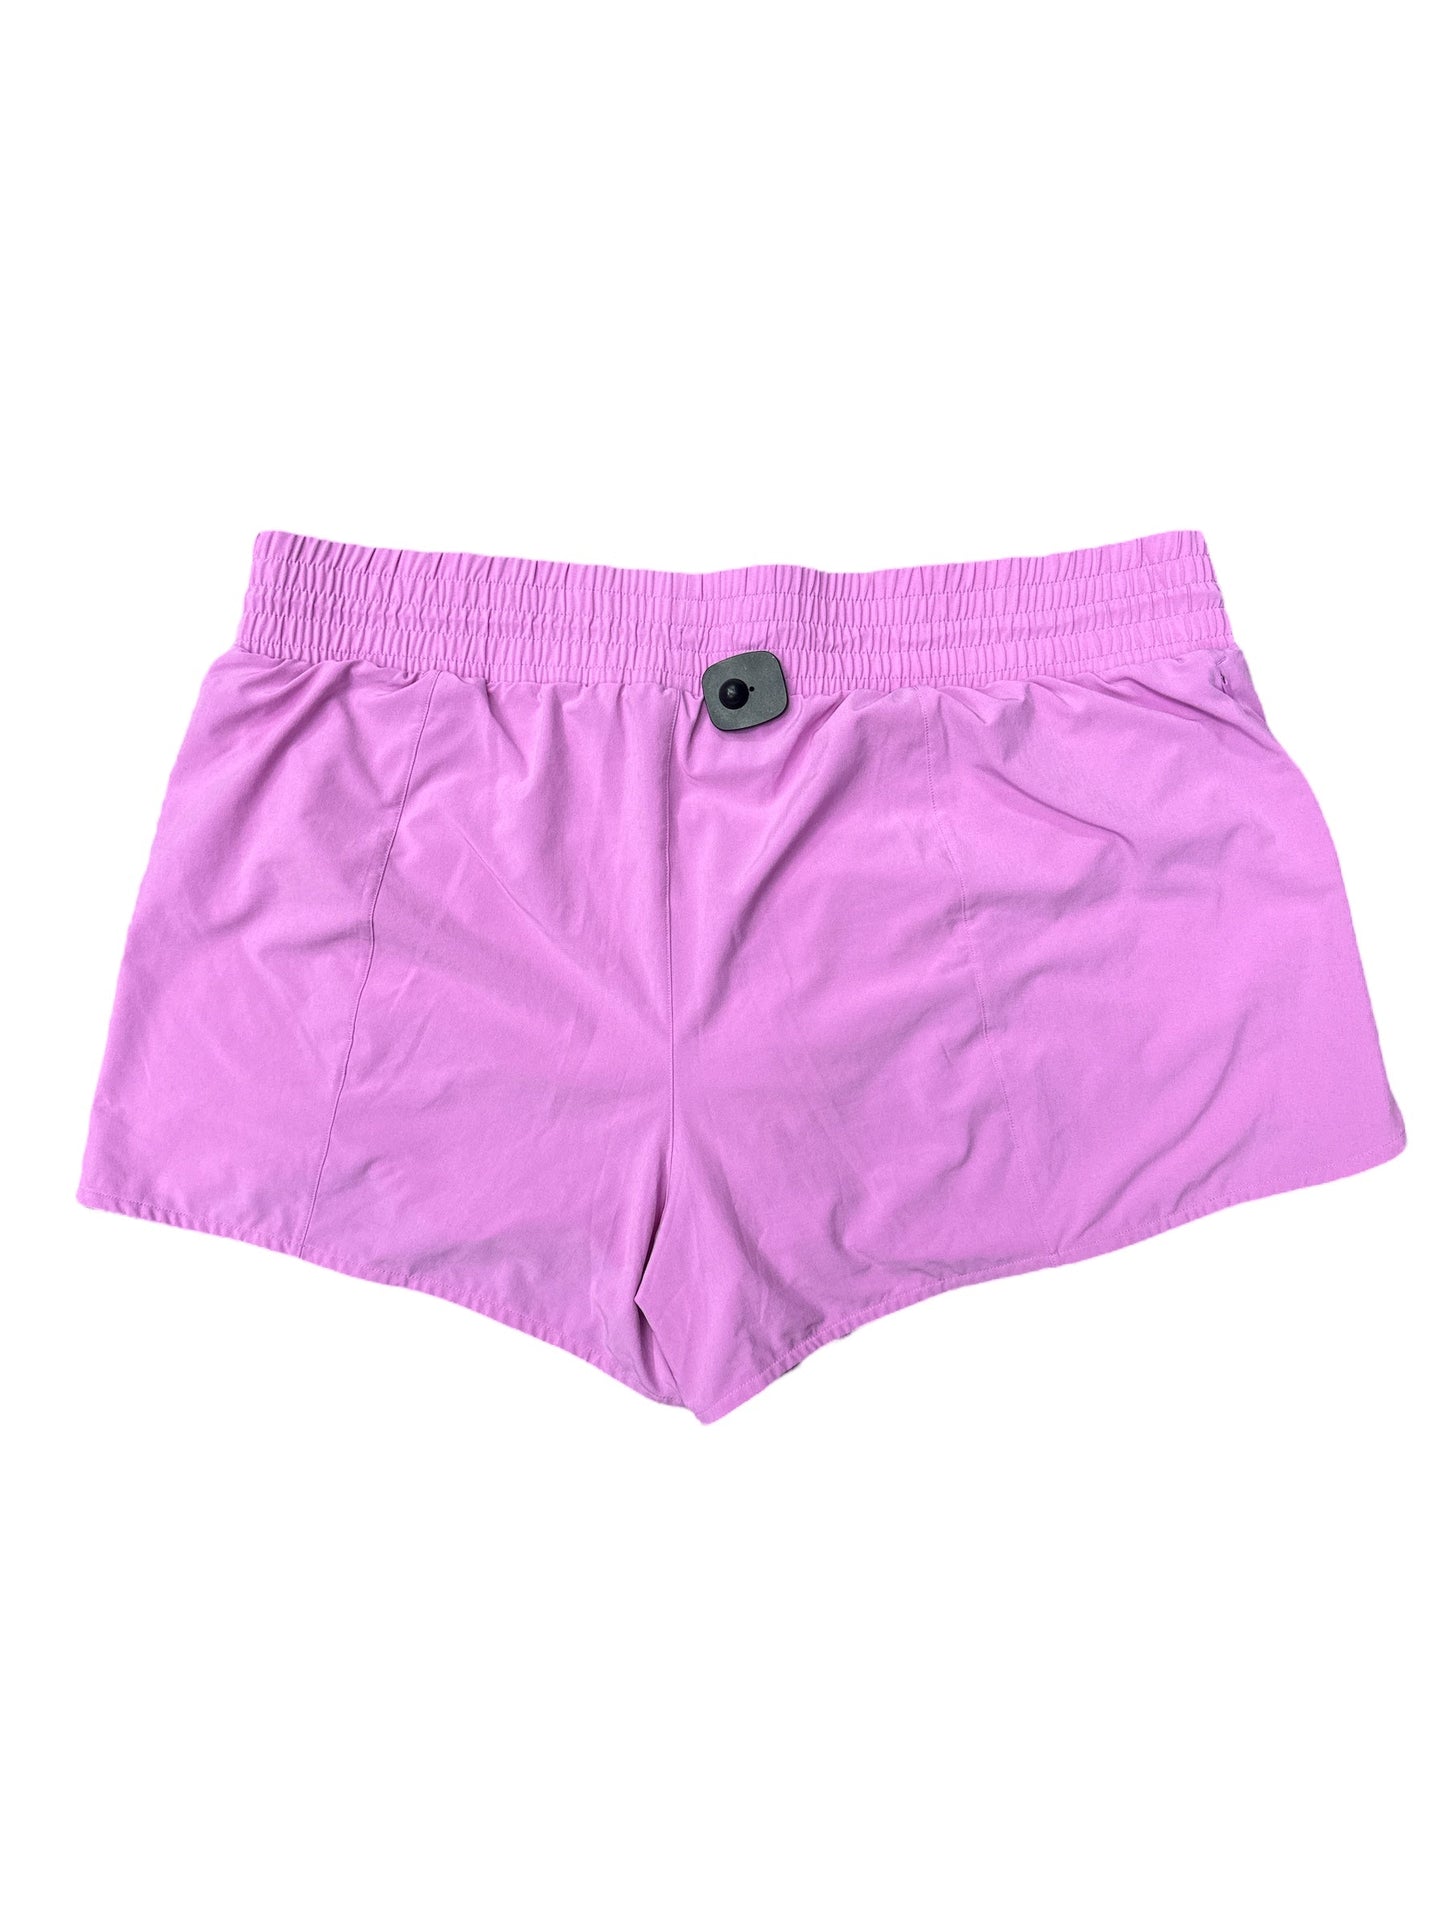 Athletic Shorts By All In Motion  Size: 2x